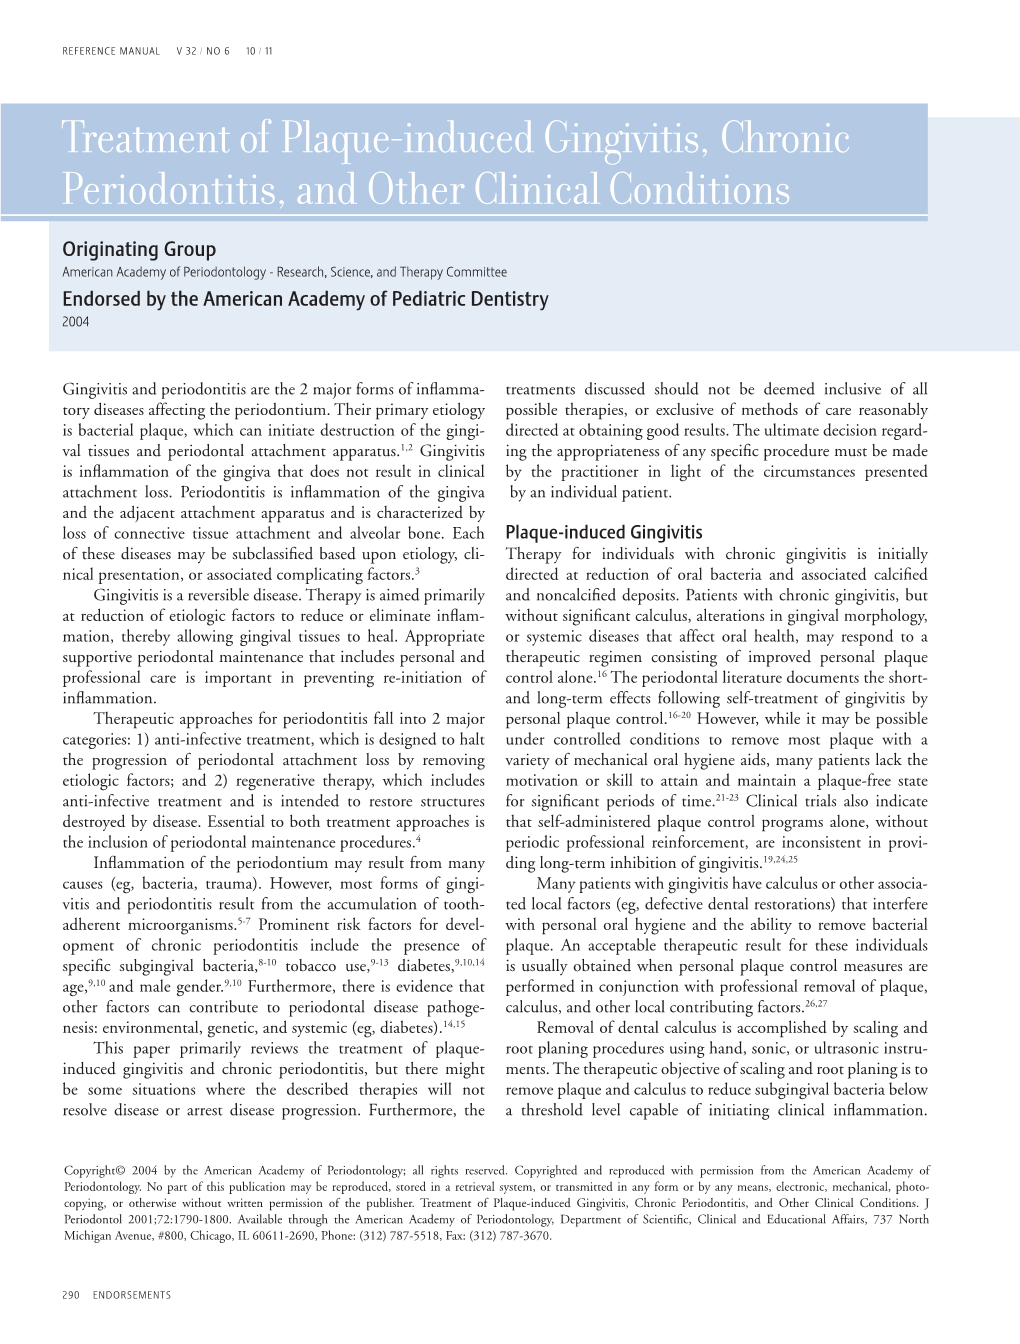 Treatment of Plaque-Induced Gingivitis, Chronic Periodontitis, and Other Clinical Conditions